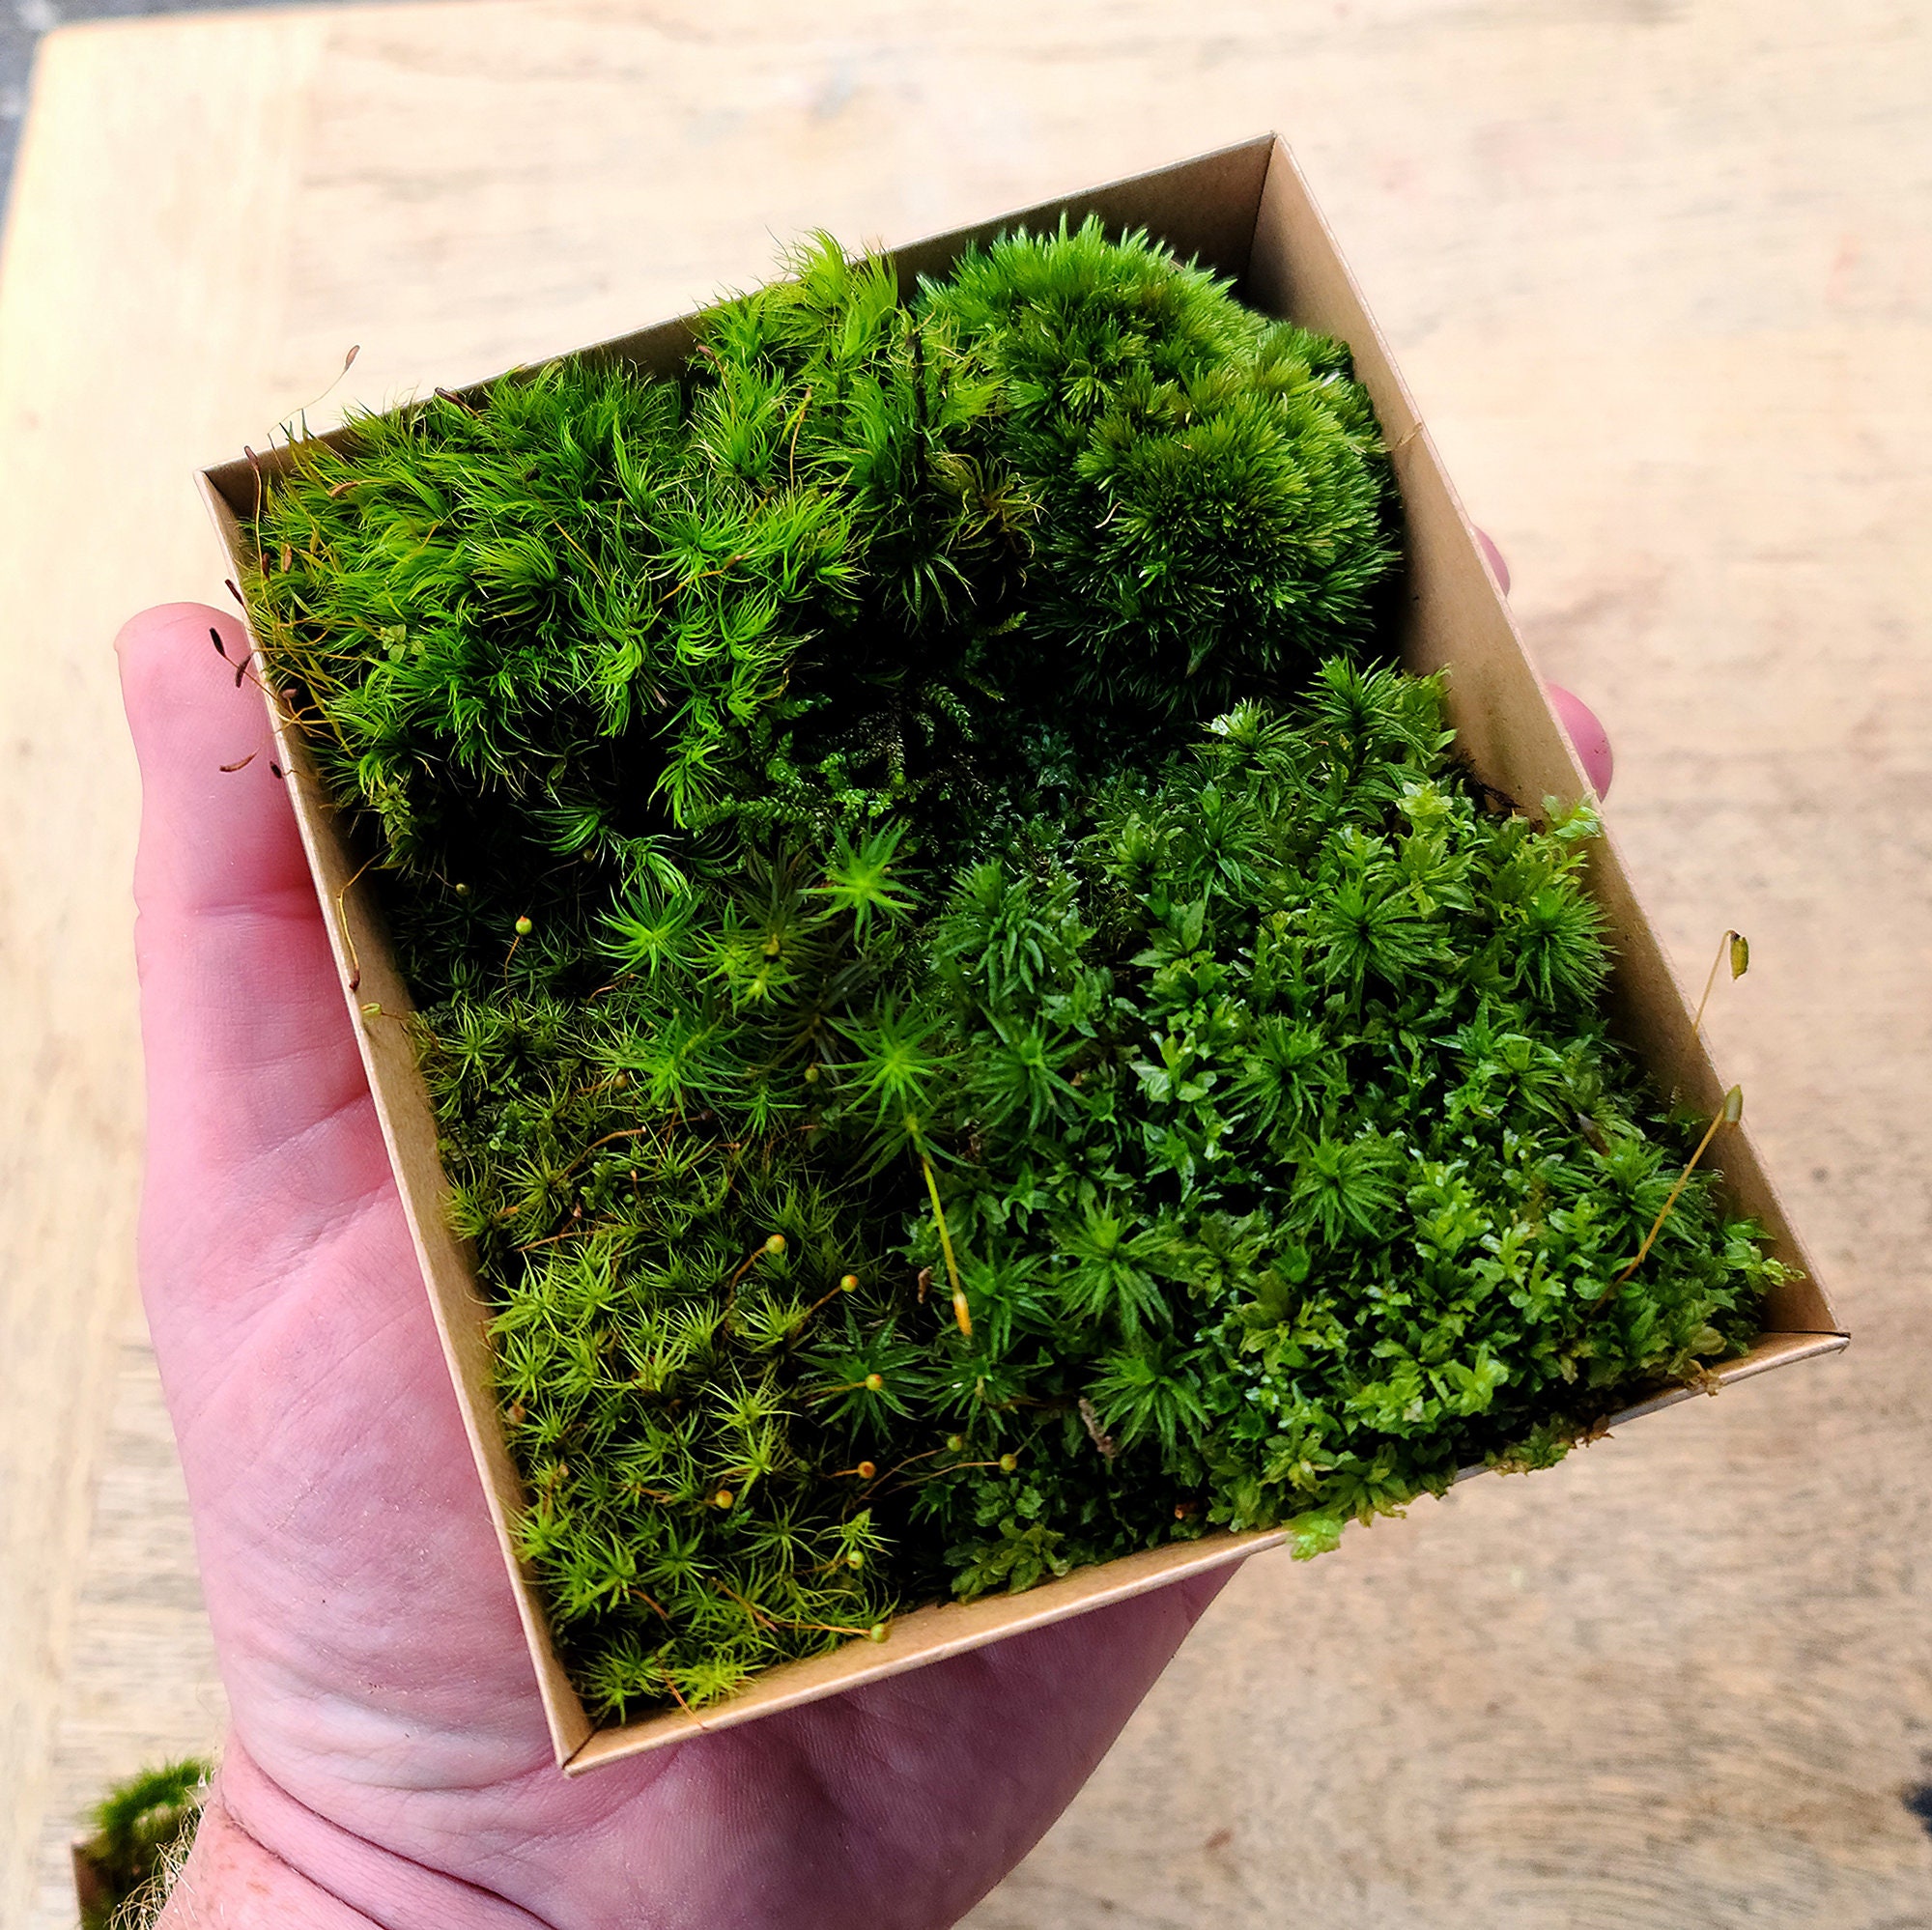 Live Moss Multi Pack - Sustainably Harvested - 3-4 Varieties